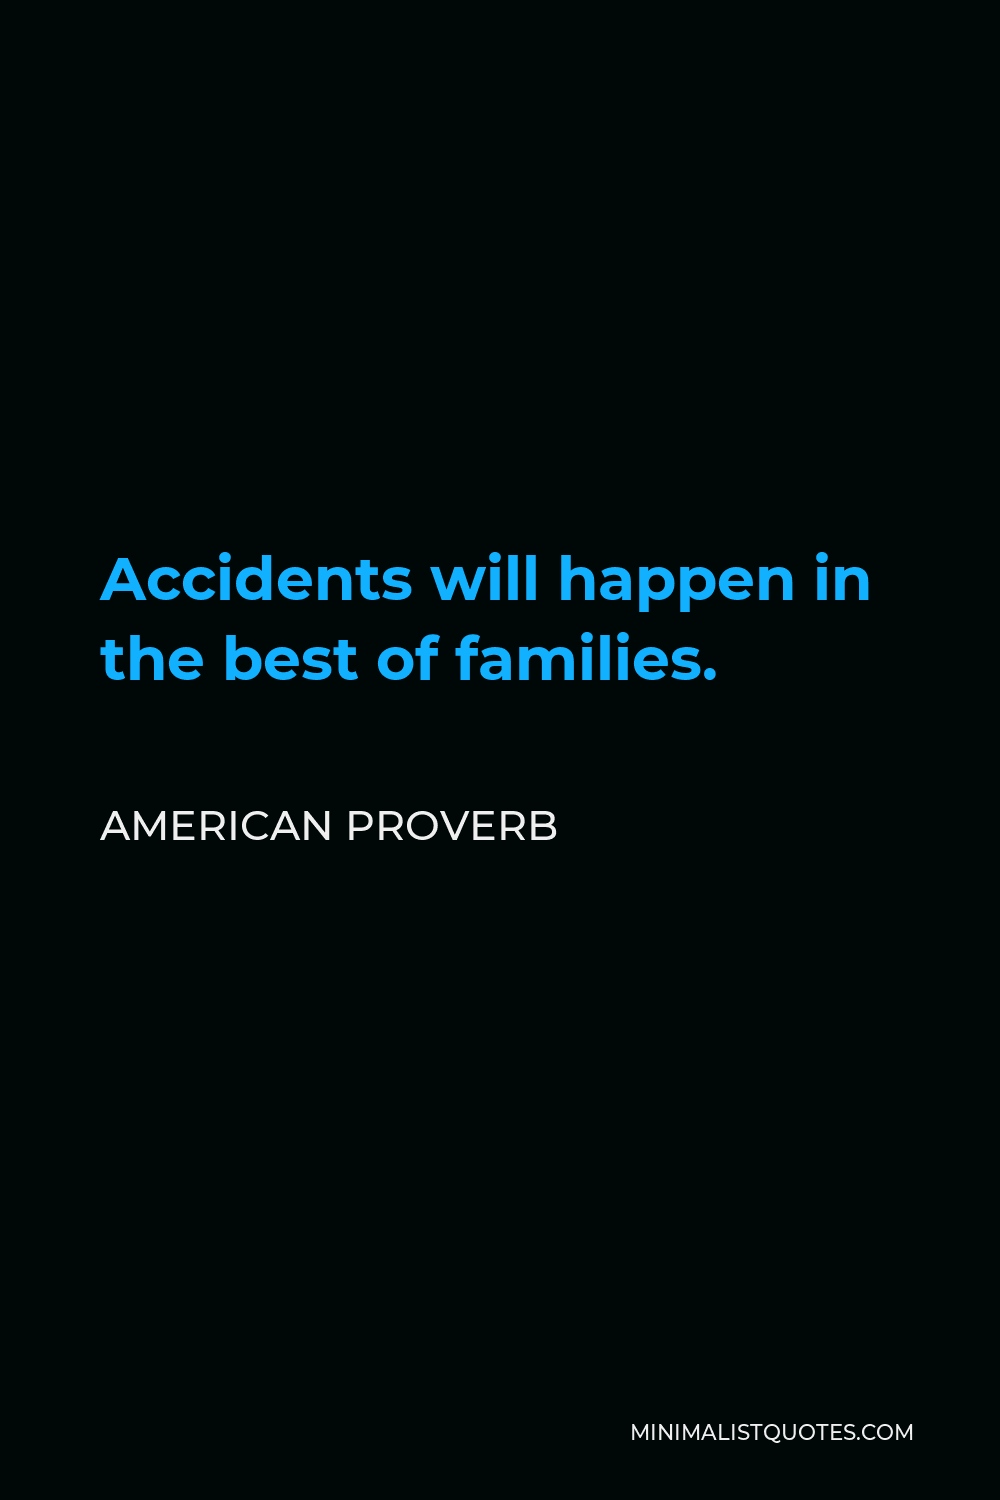 American Proverb Quote - Accidents will happen in the best of families.